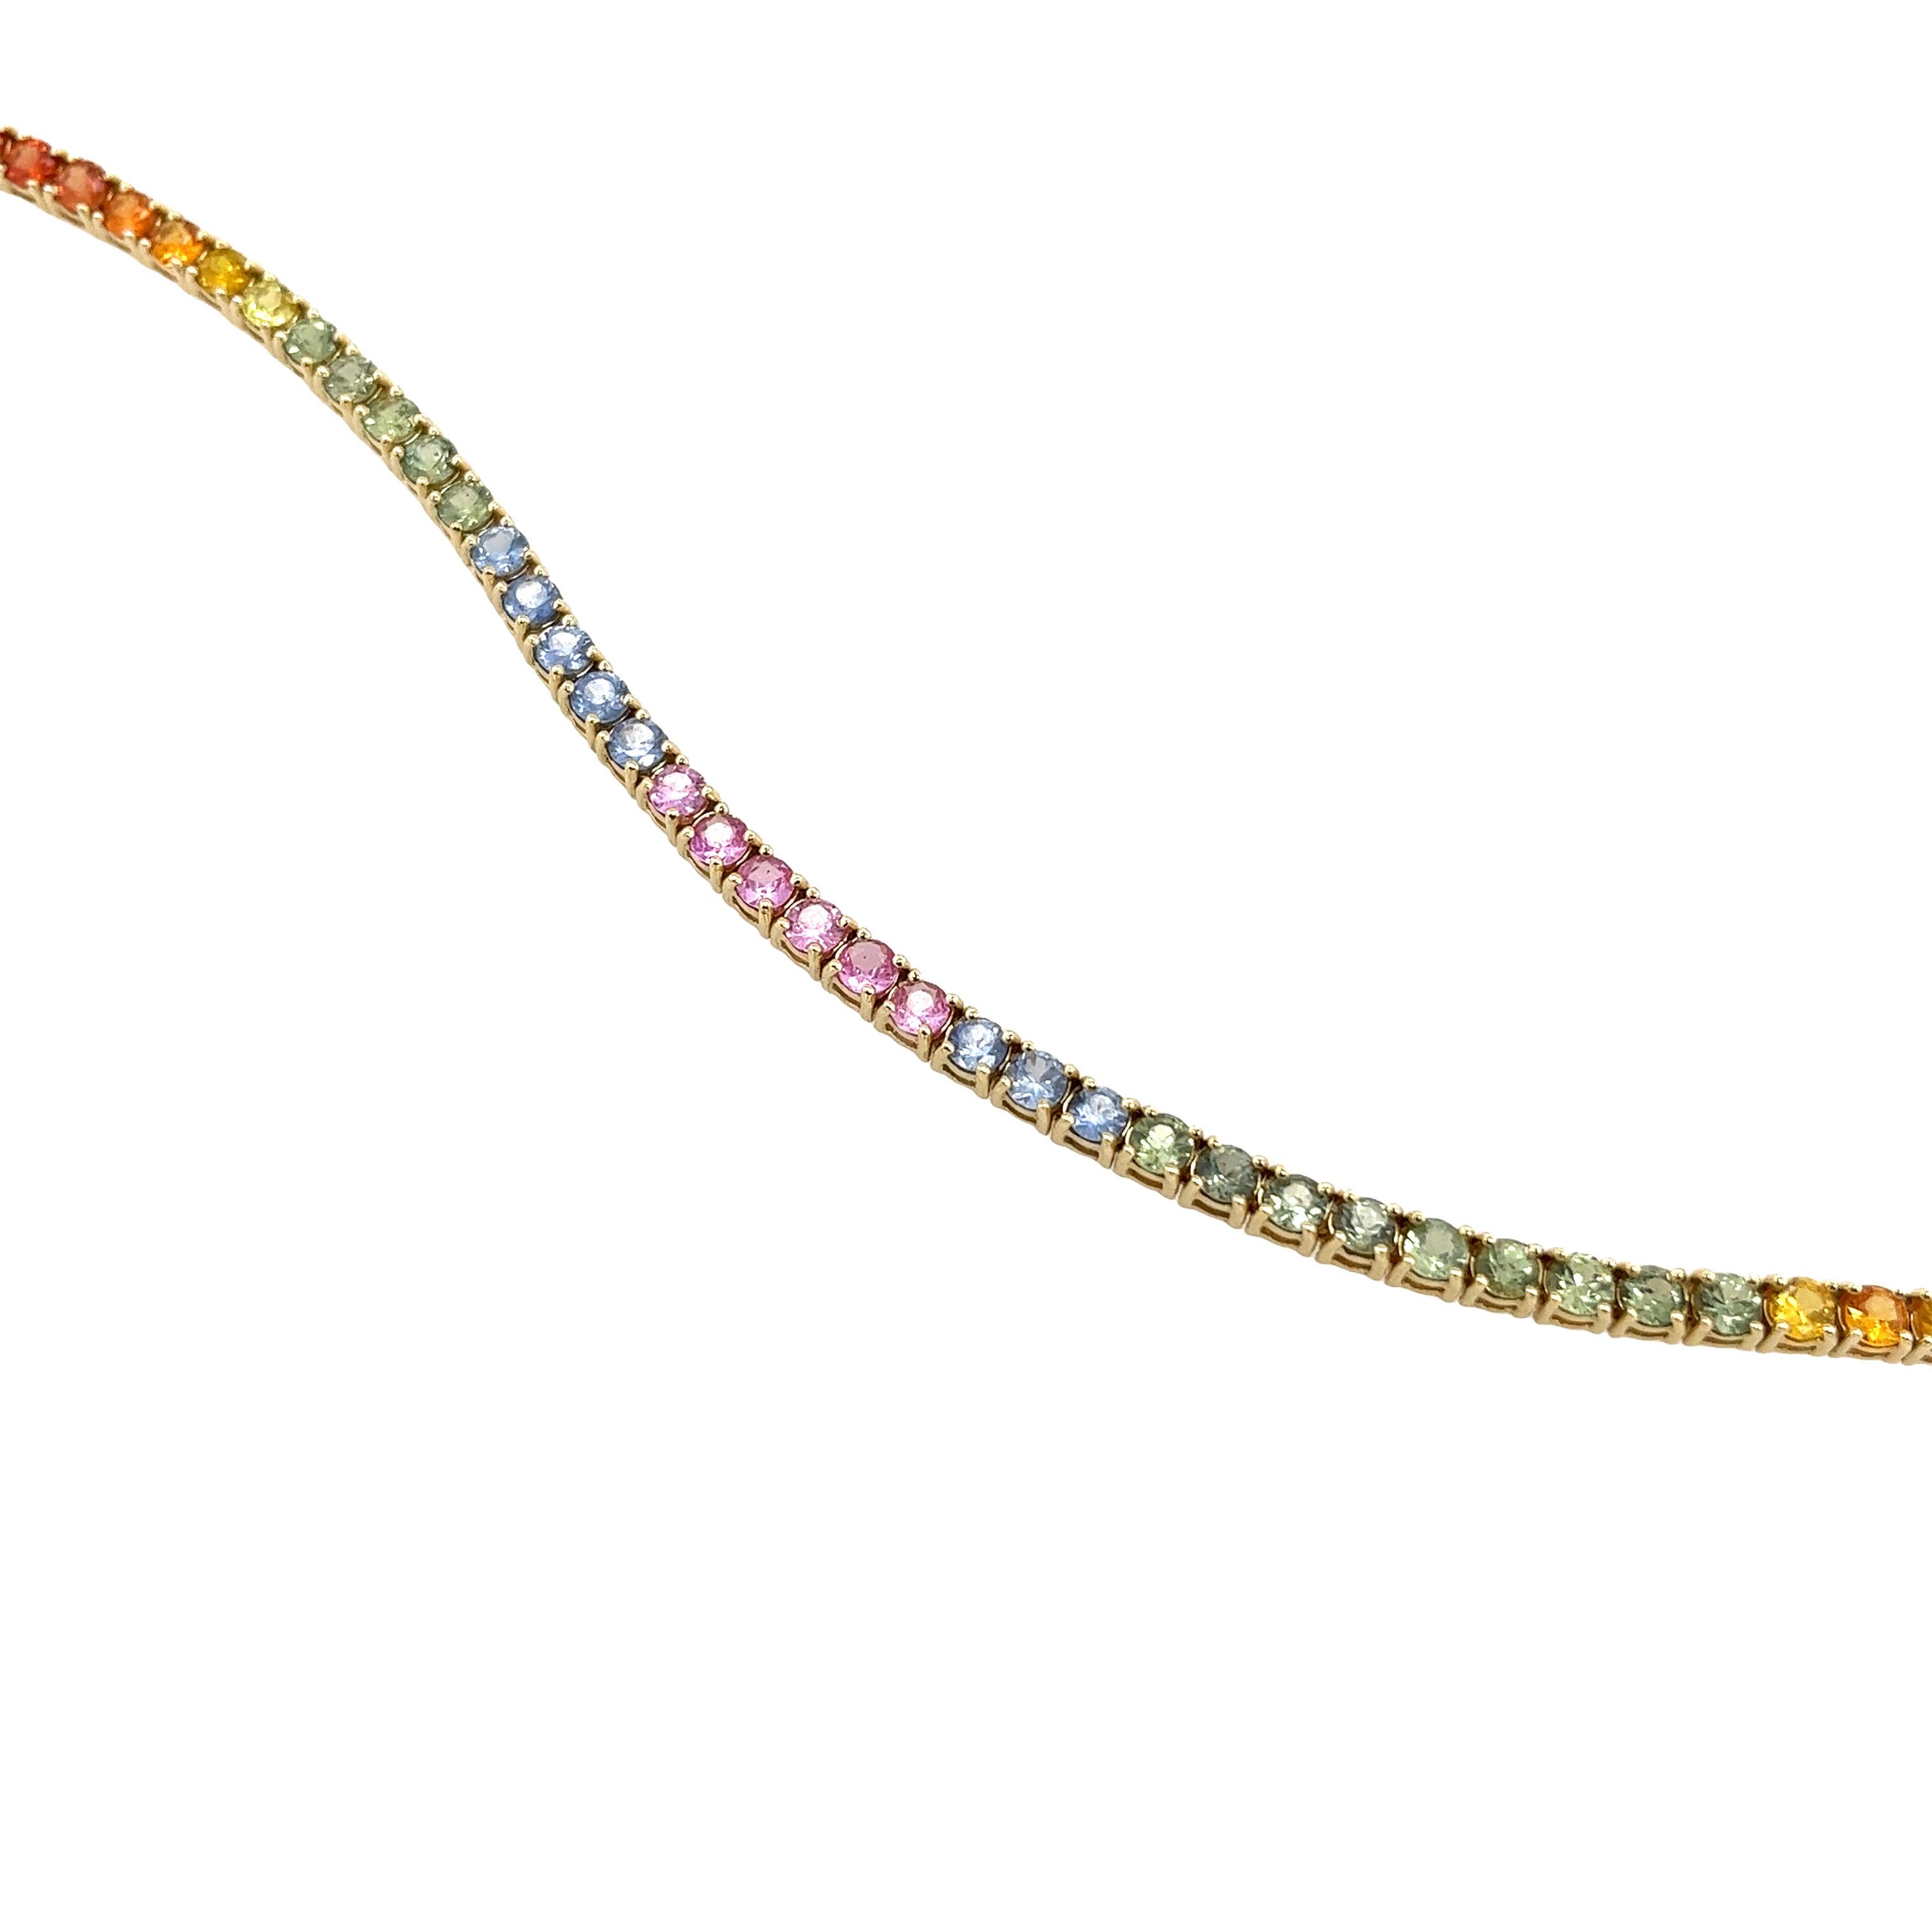 This bracelet is made of 14ct yellow gold and set with 51 round natural round multicolor sapphires, and has a beautiful finish. This design is ideal for everyday wear.

Total Sapphire Weight: 8ct
Total Weight: 9.61g
Bracelet Length: 7.5